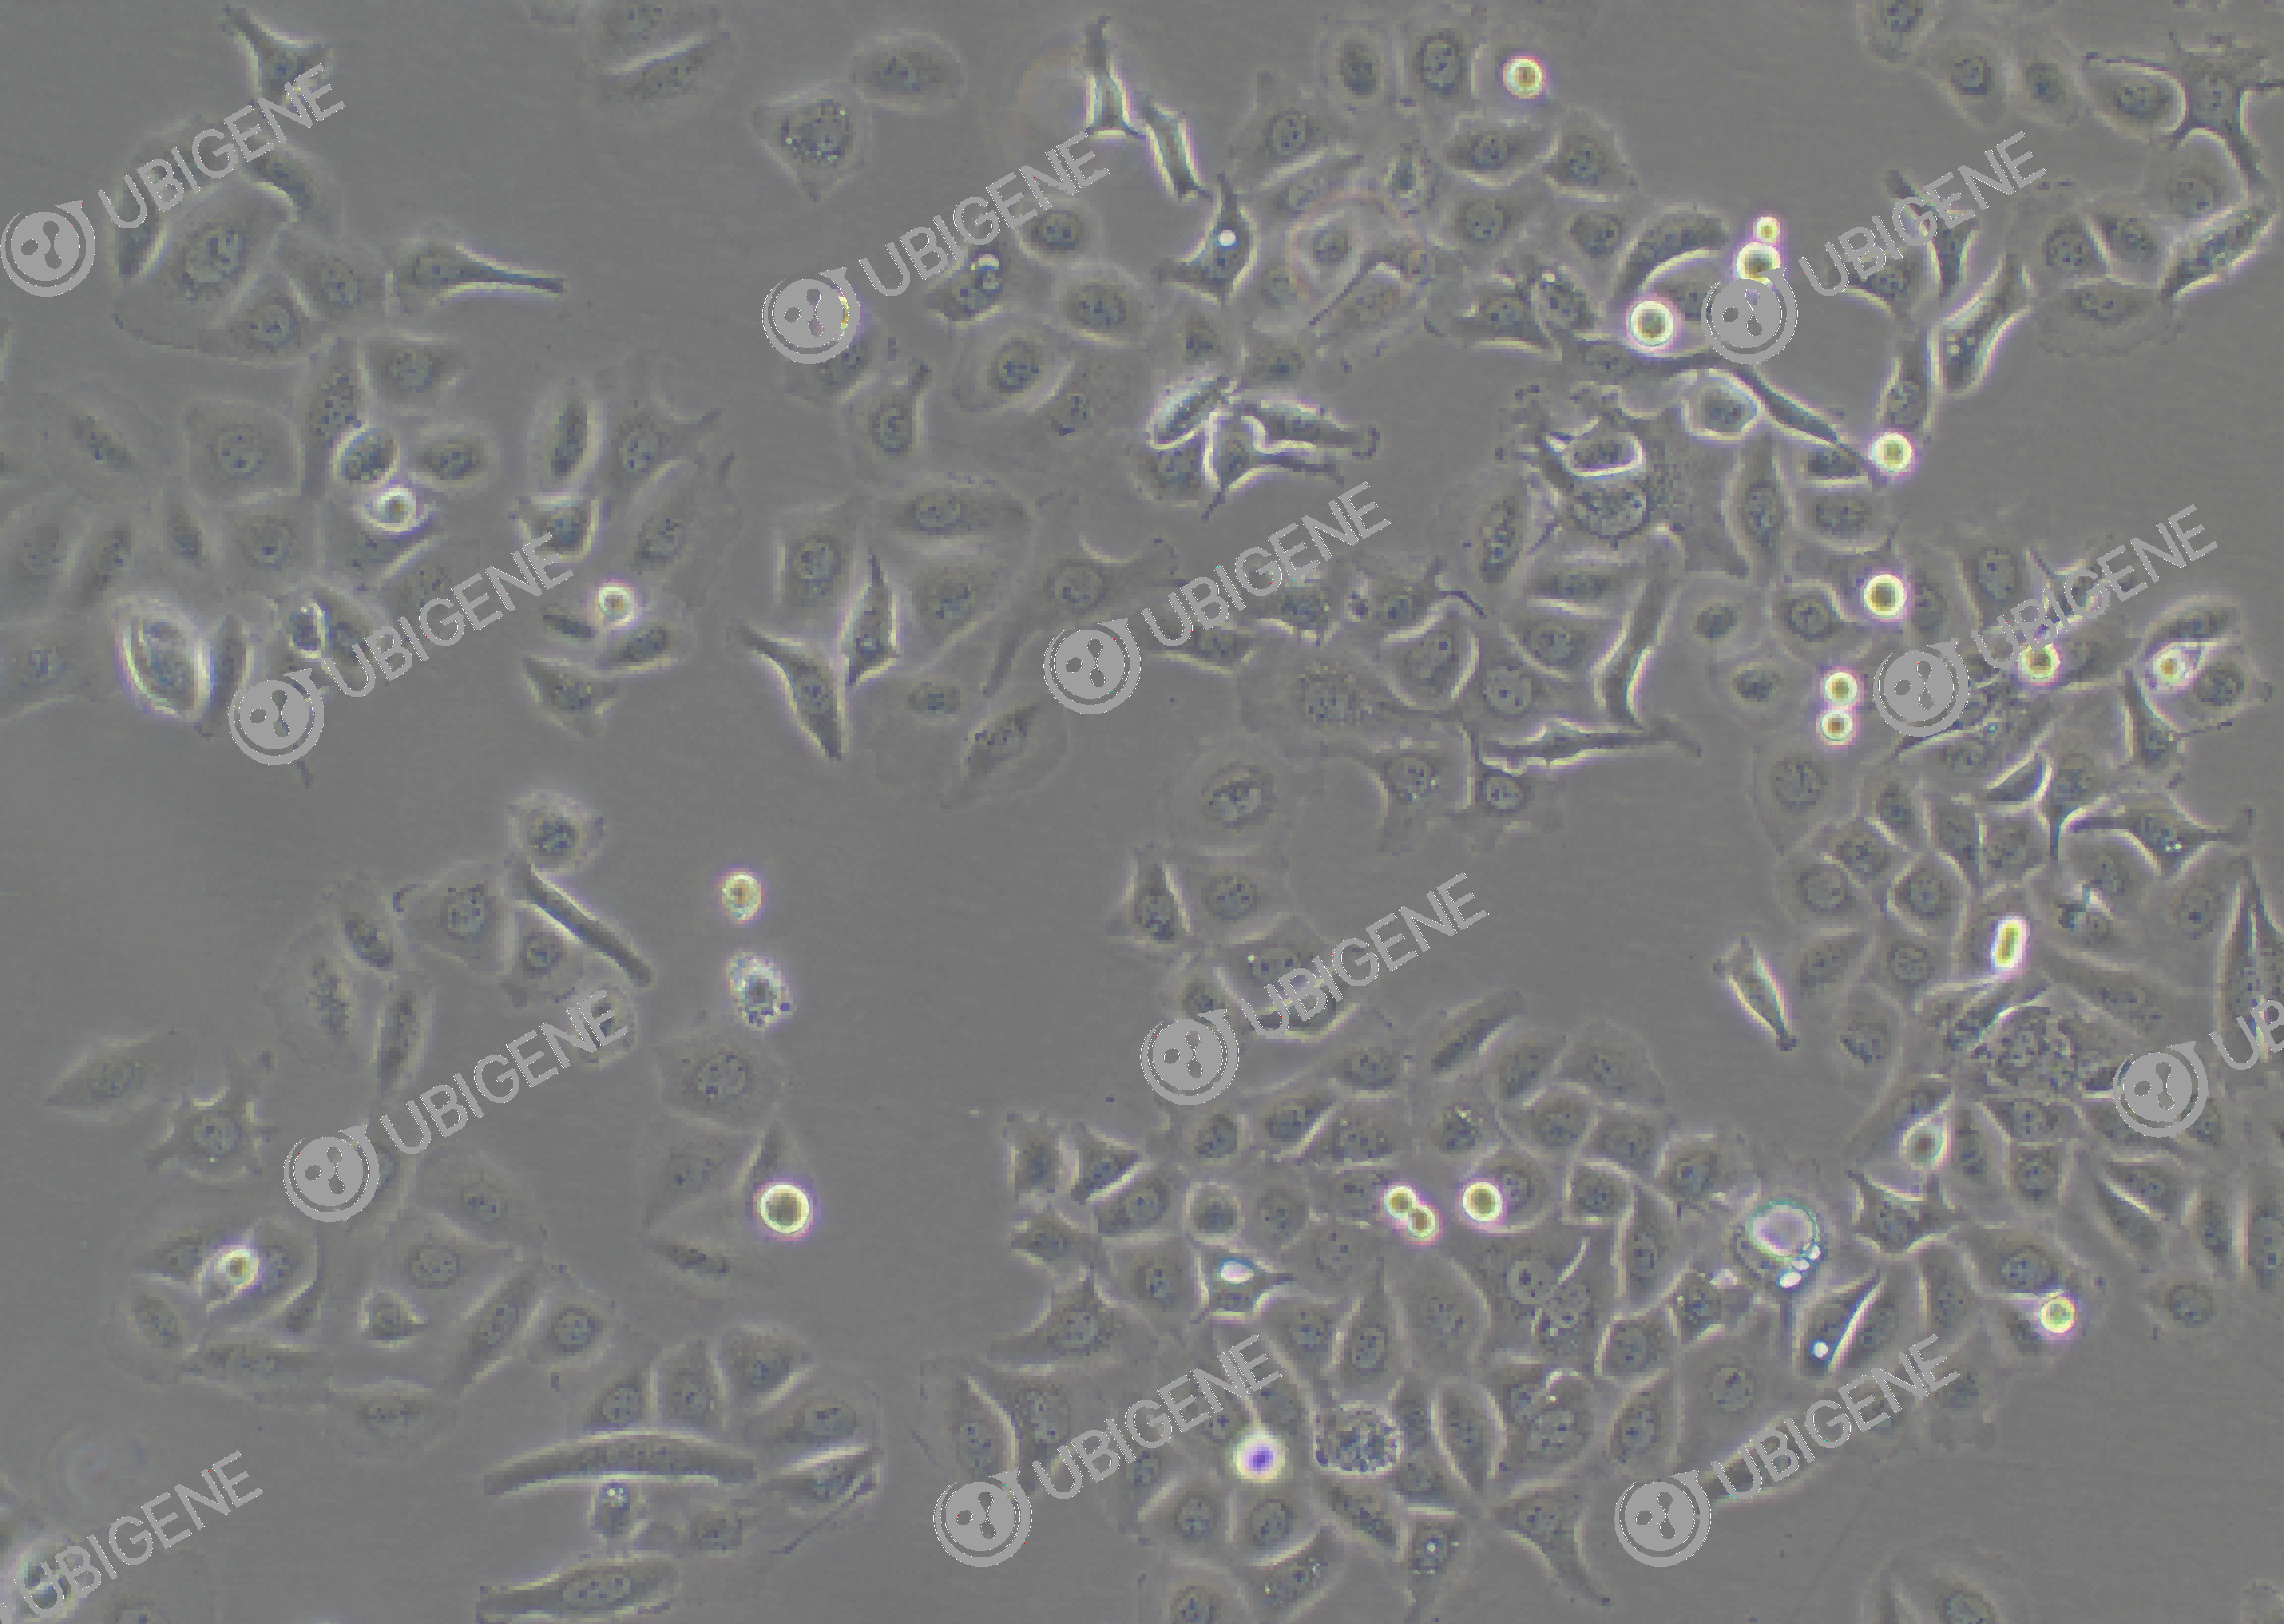 HCC1143 cell line Cultured cell morphology